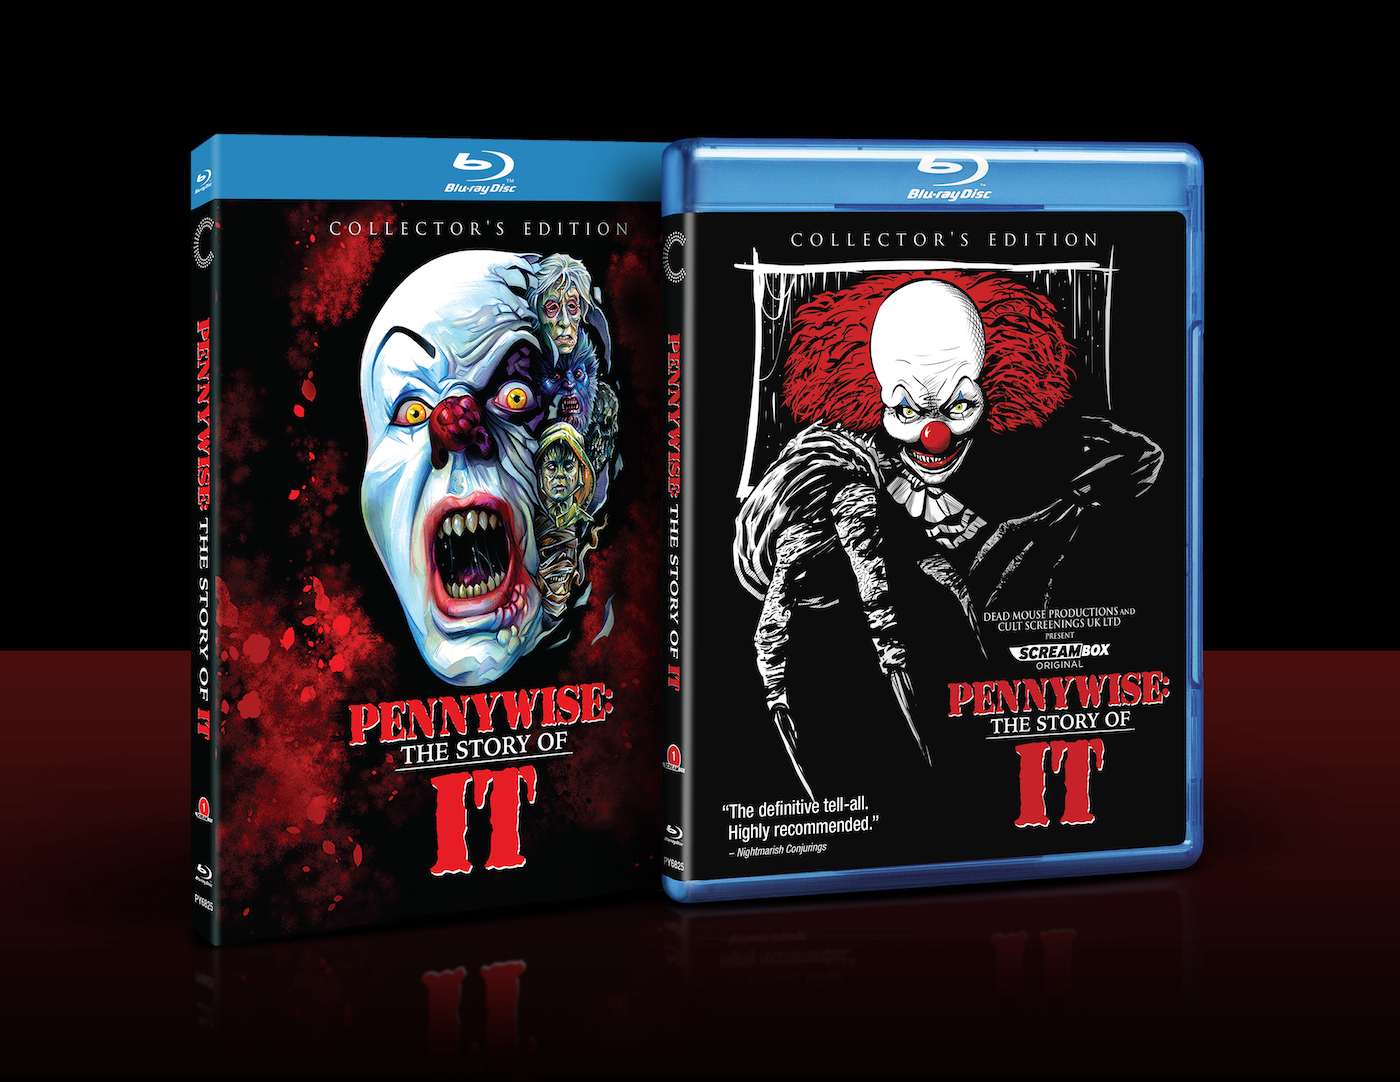 Pennywise The Story of IT Scares up a Collectors Edition Blu-ray!